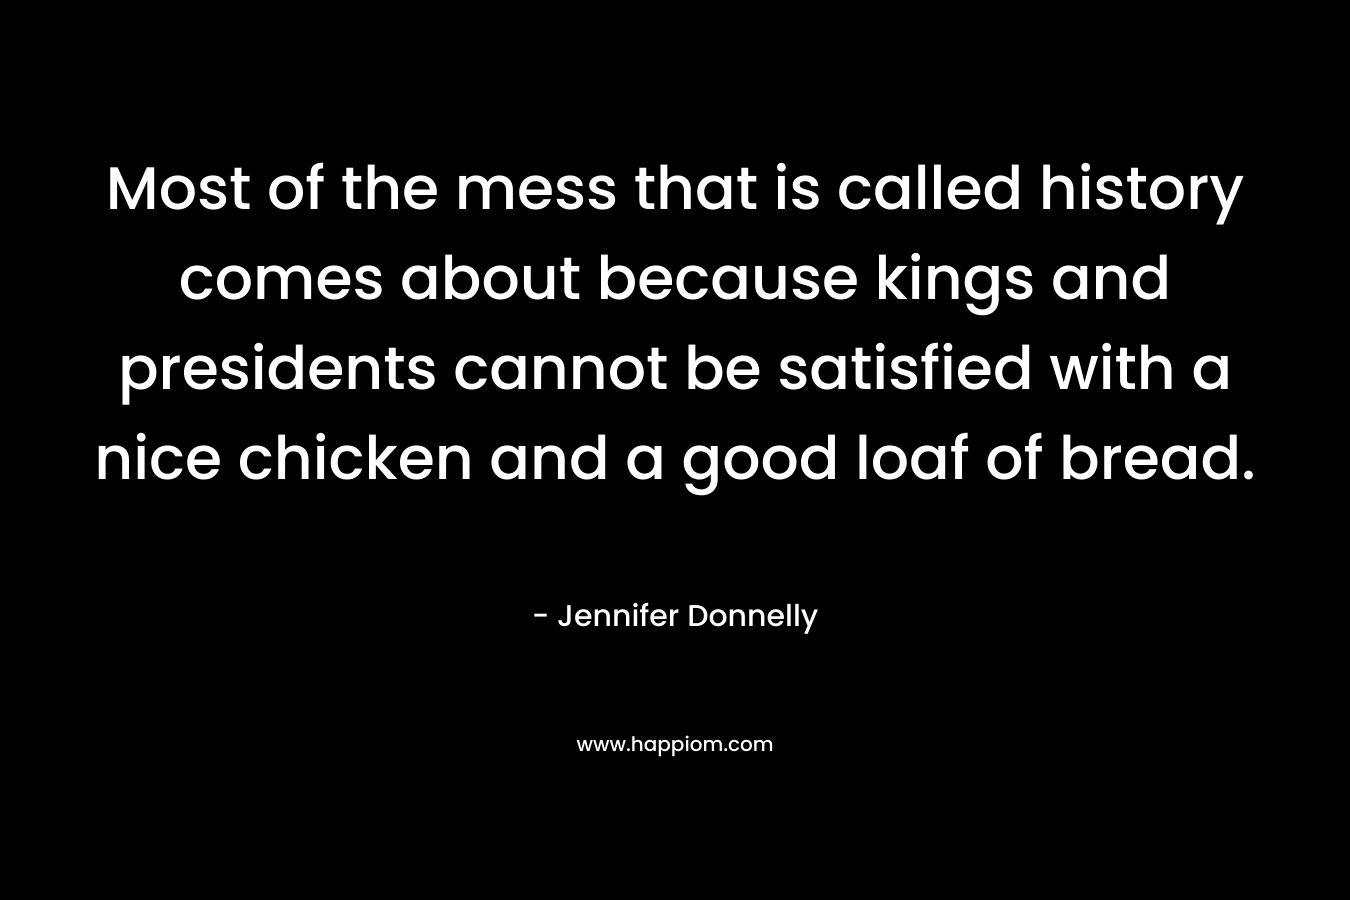 Most of the mess that is called history comes about because kings and presidents cannot be satisfied with a nice chicken and a good loaf of bread.